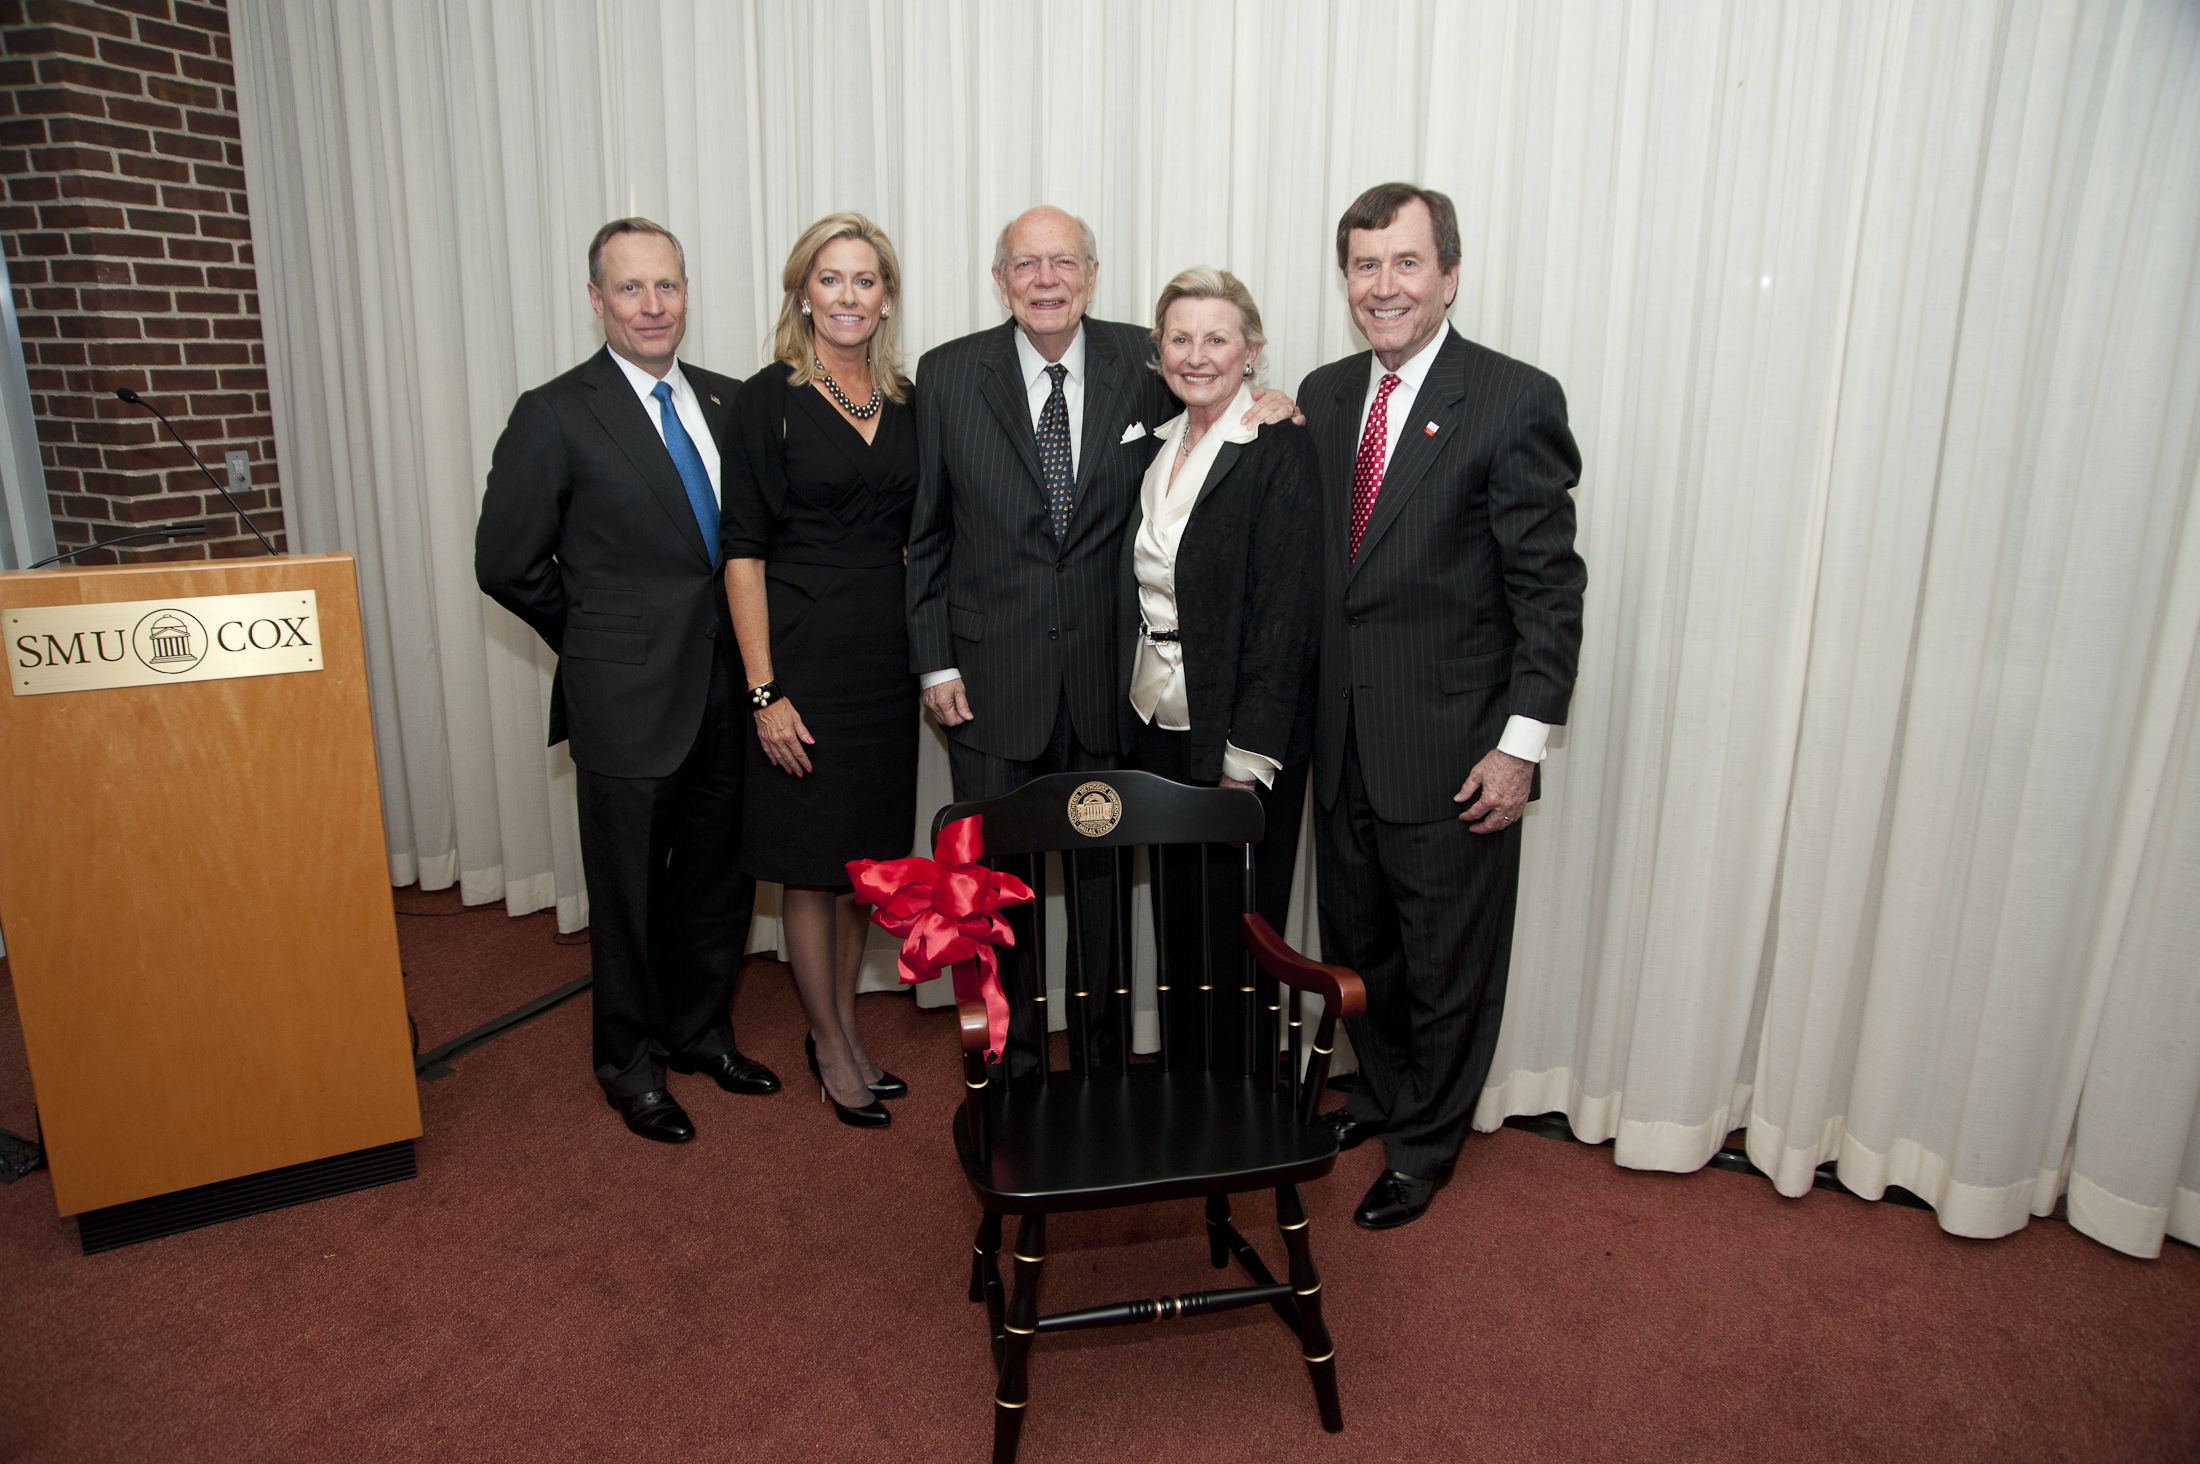 Ross Perot, Jr., Sarah Fullinwider Perot ’83, Jerome “Jerry” M. Fullinwider ’51, Leah Young Fullinwider ’61 and SMU President R. Gerald Turner celebrate the Jerome M. Fullinwider Centennial Chair in Economic Freedom at a 2011 ceremony held at the SMU Cox School of Business. The Perots established the chair to honor Fullinwider’s interest in free enterprise.